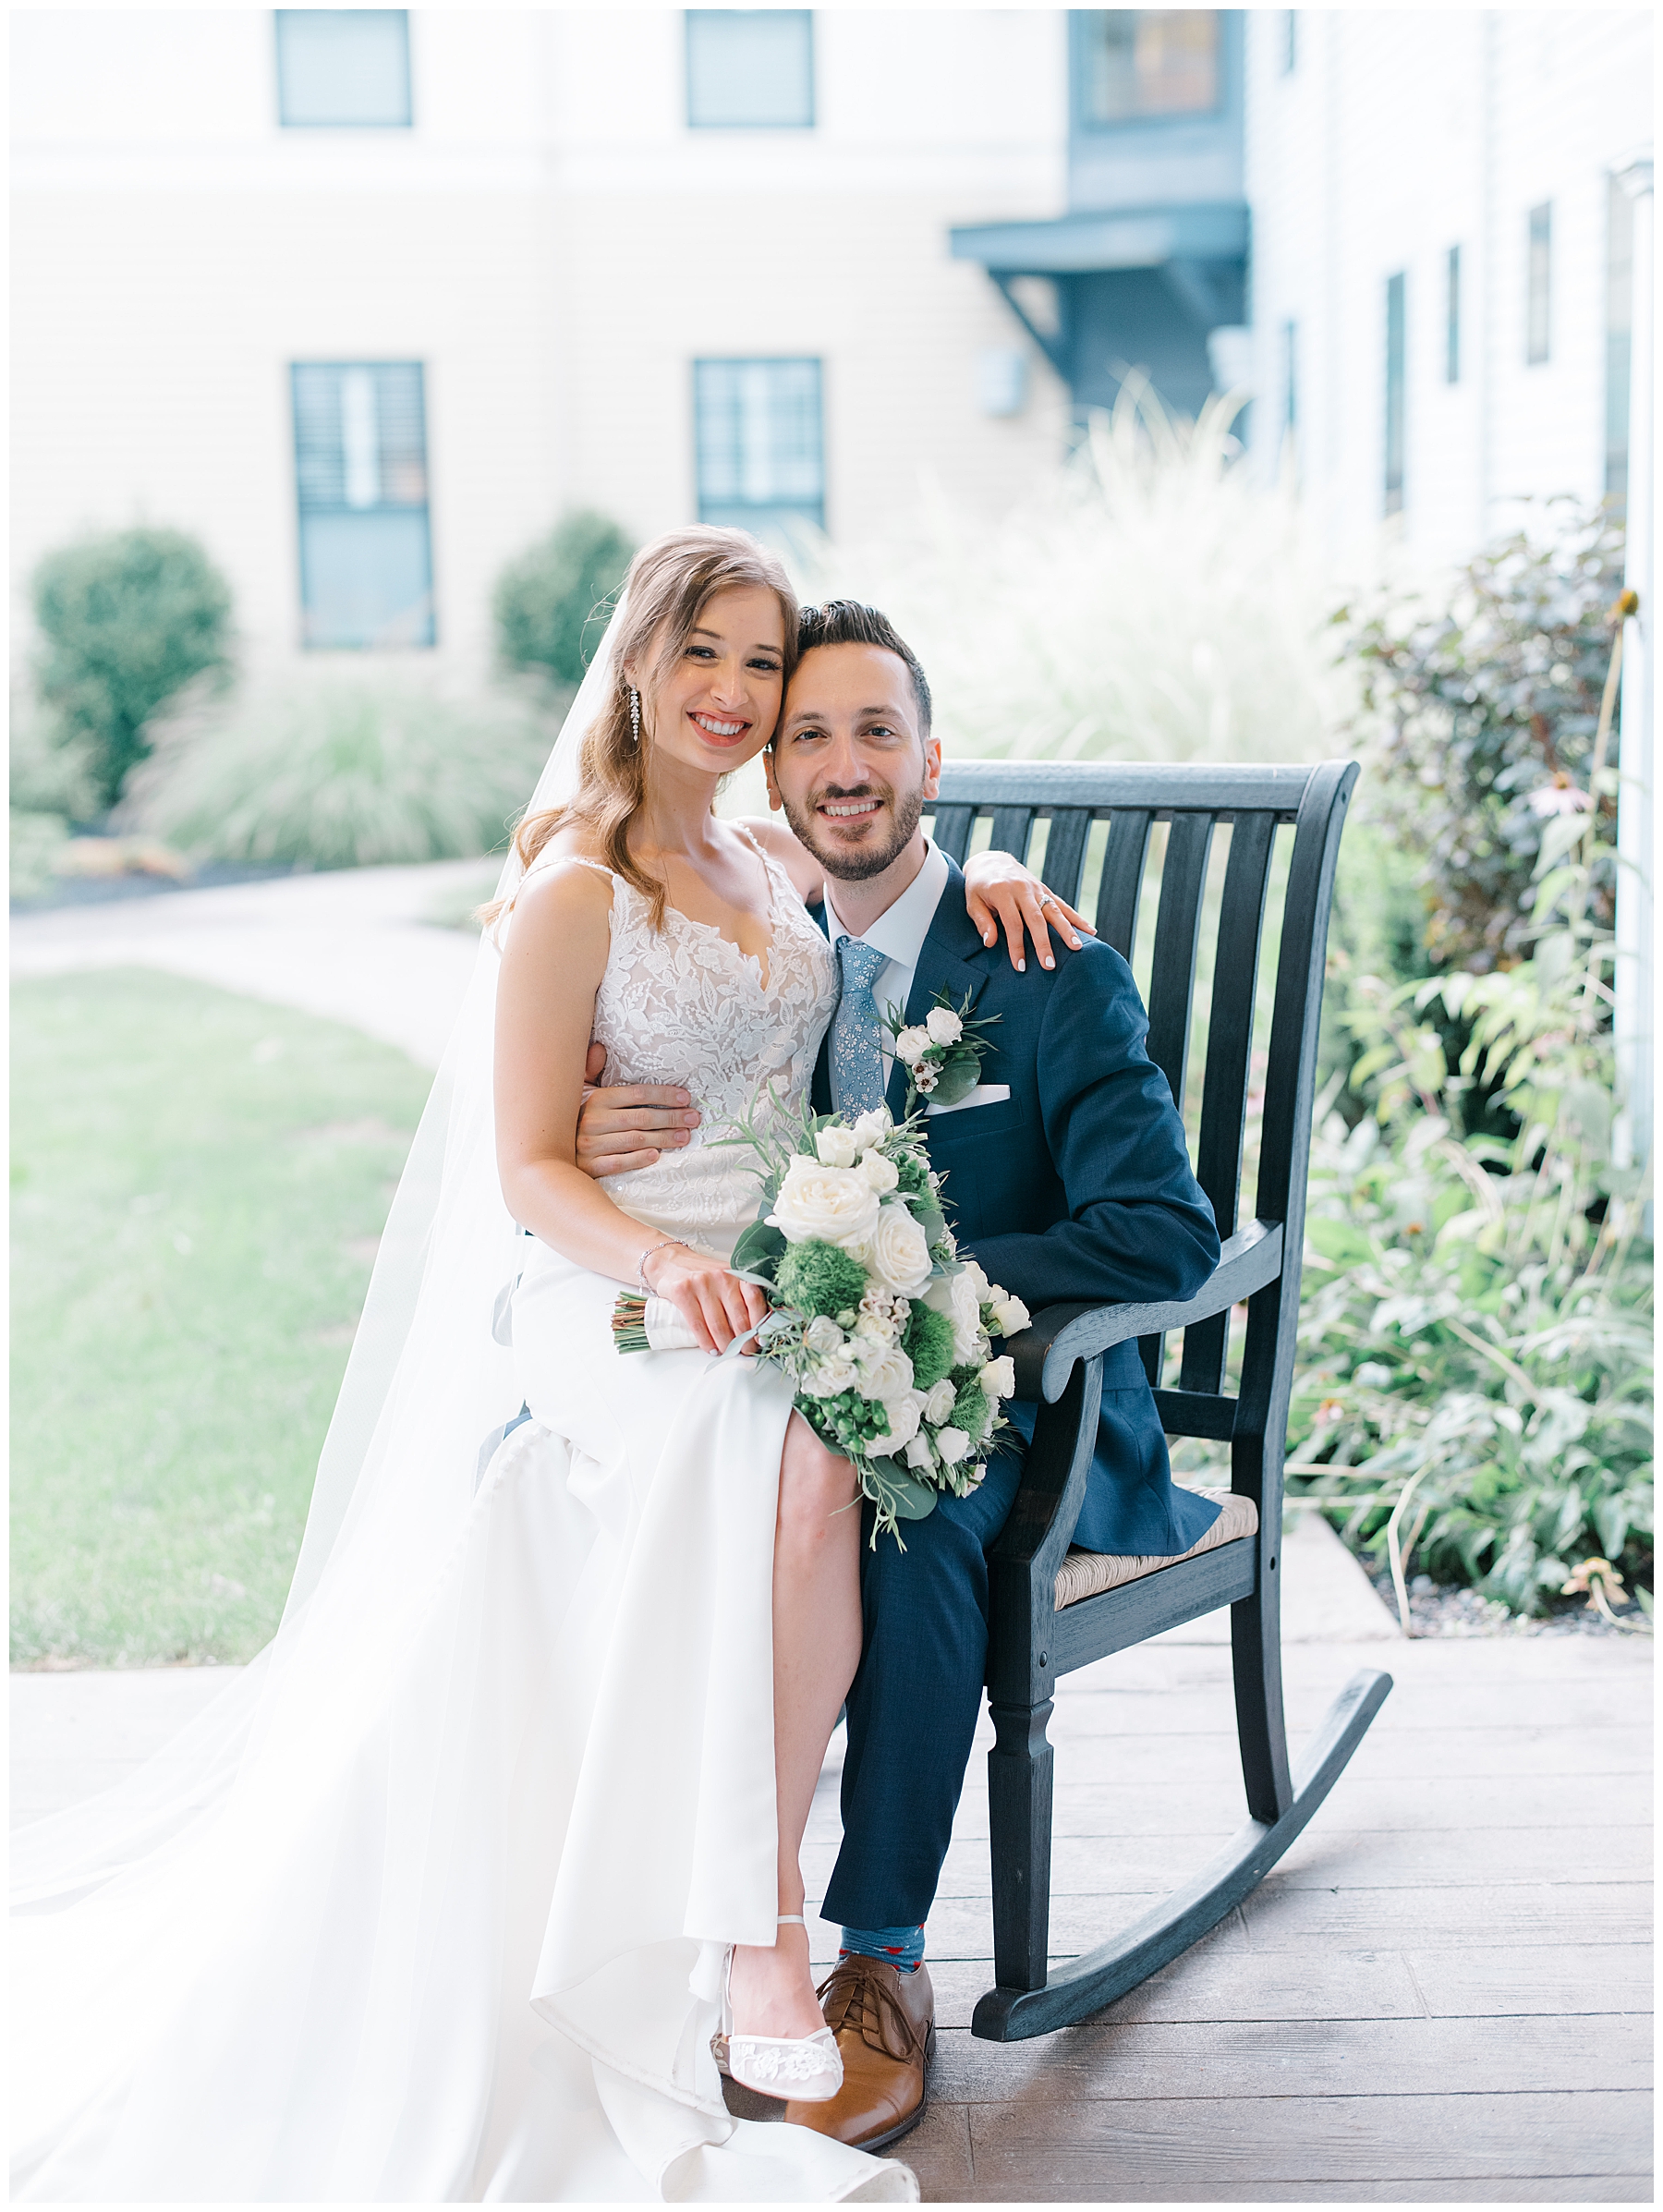 newlyweds sit together on rocking chair 